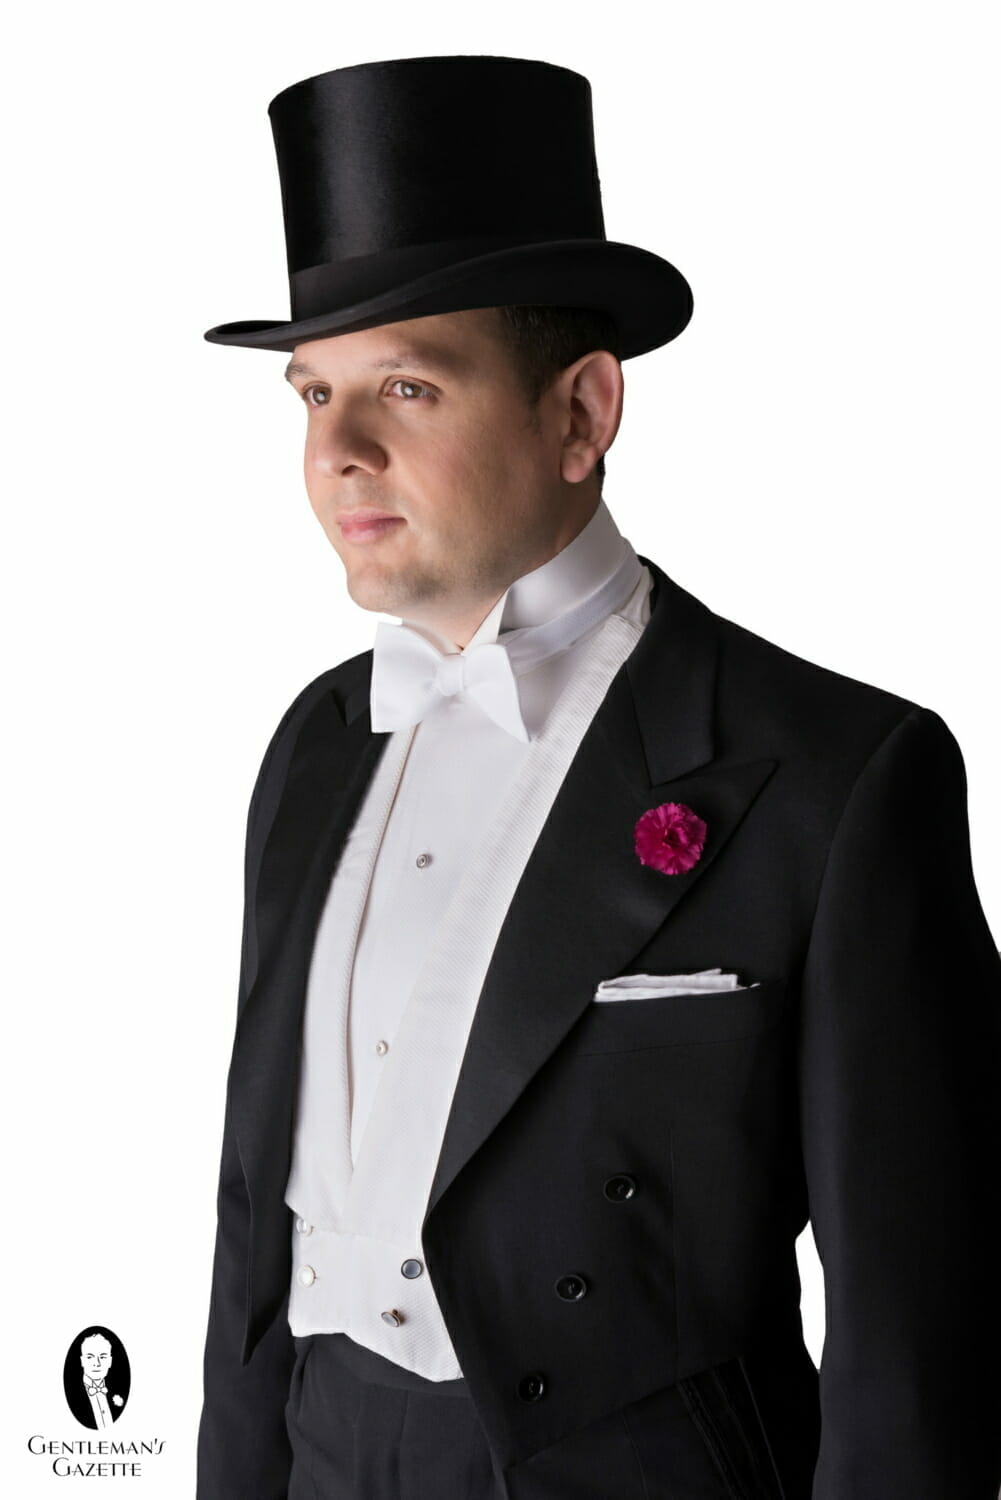 Wing Collar Single End Bow Tie Marcella White Tie Shirt and Waistcoat with boutonniere pocket square and top hat